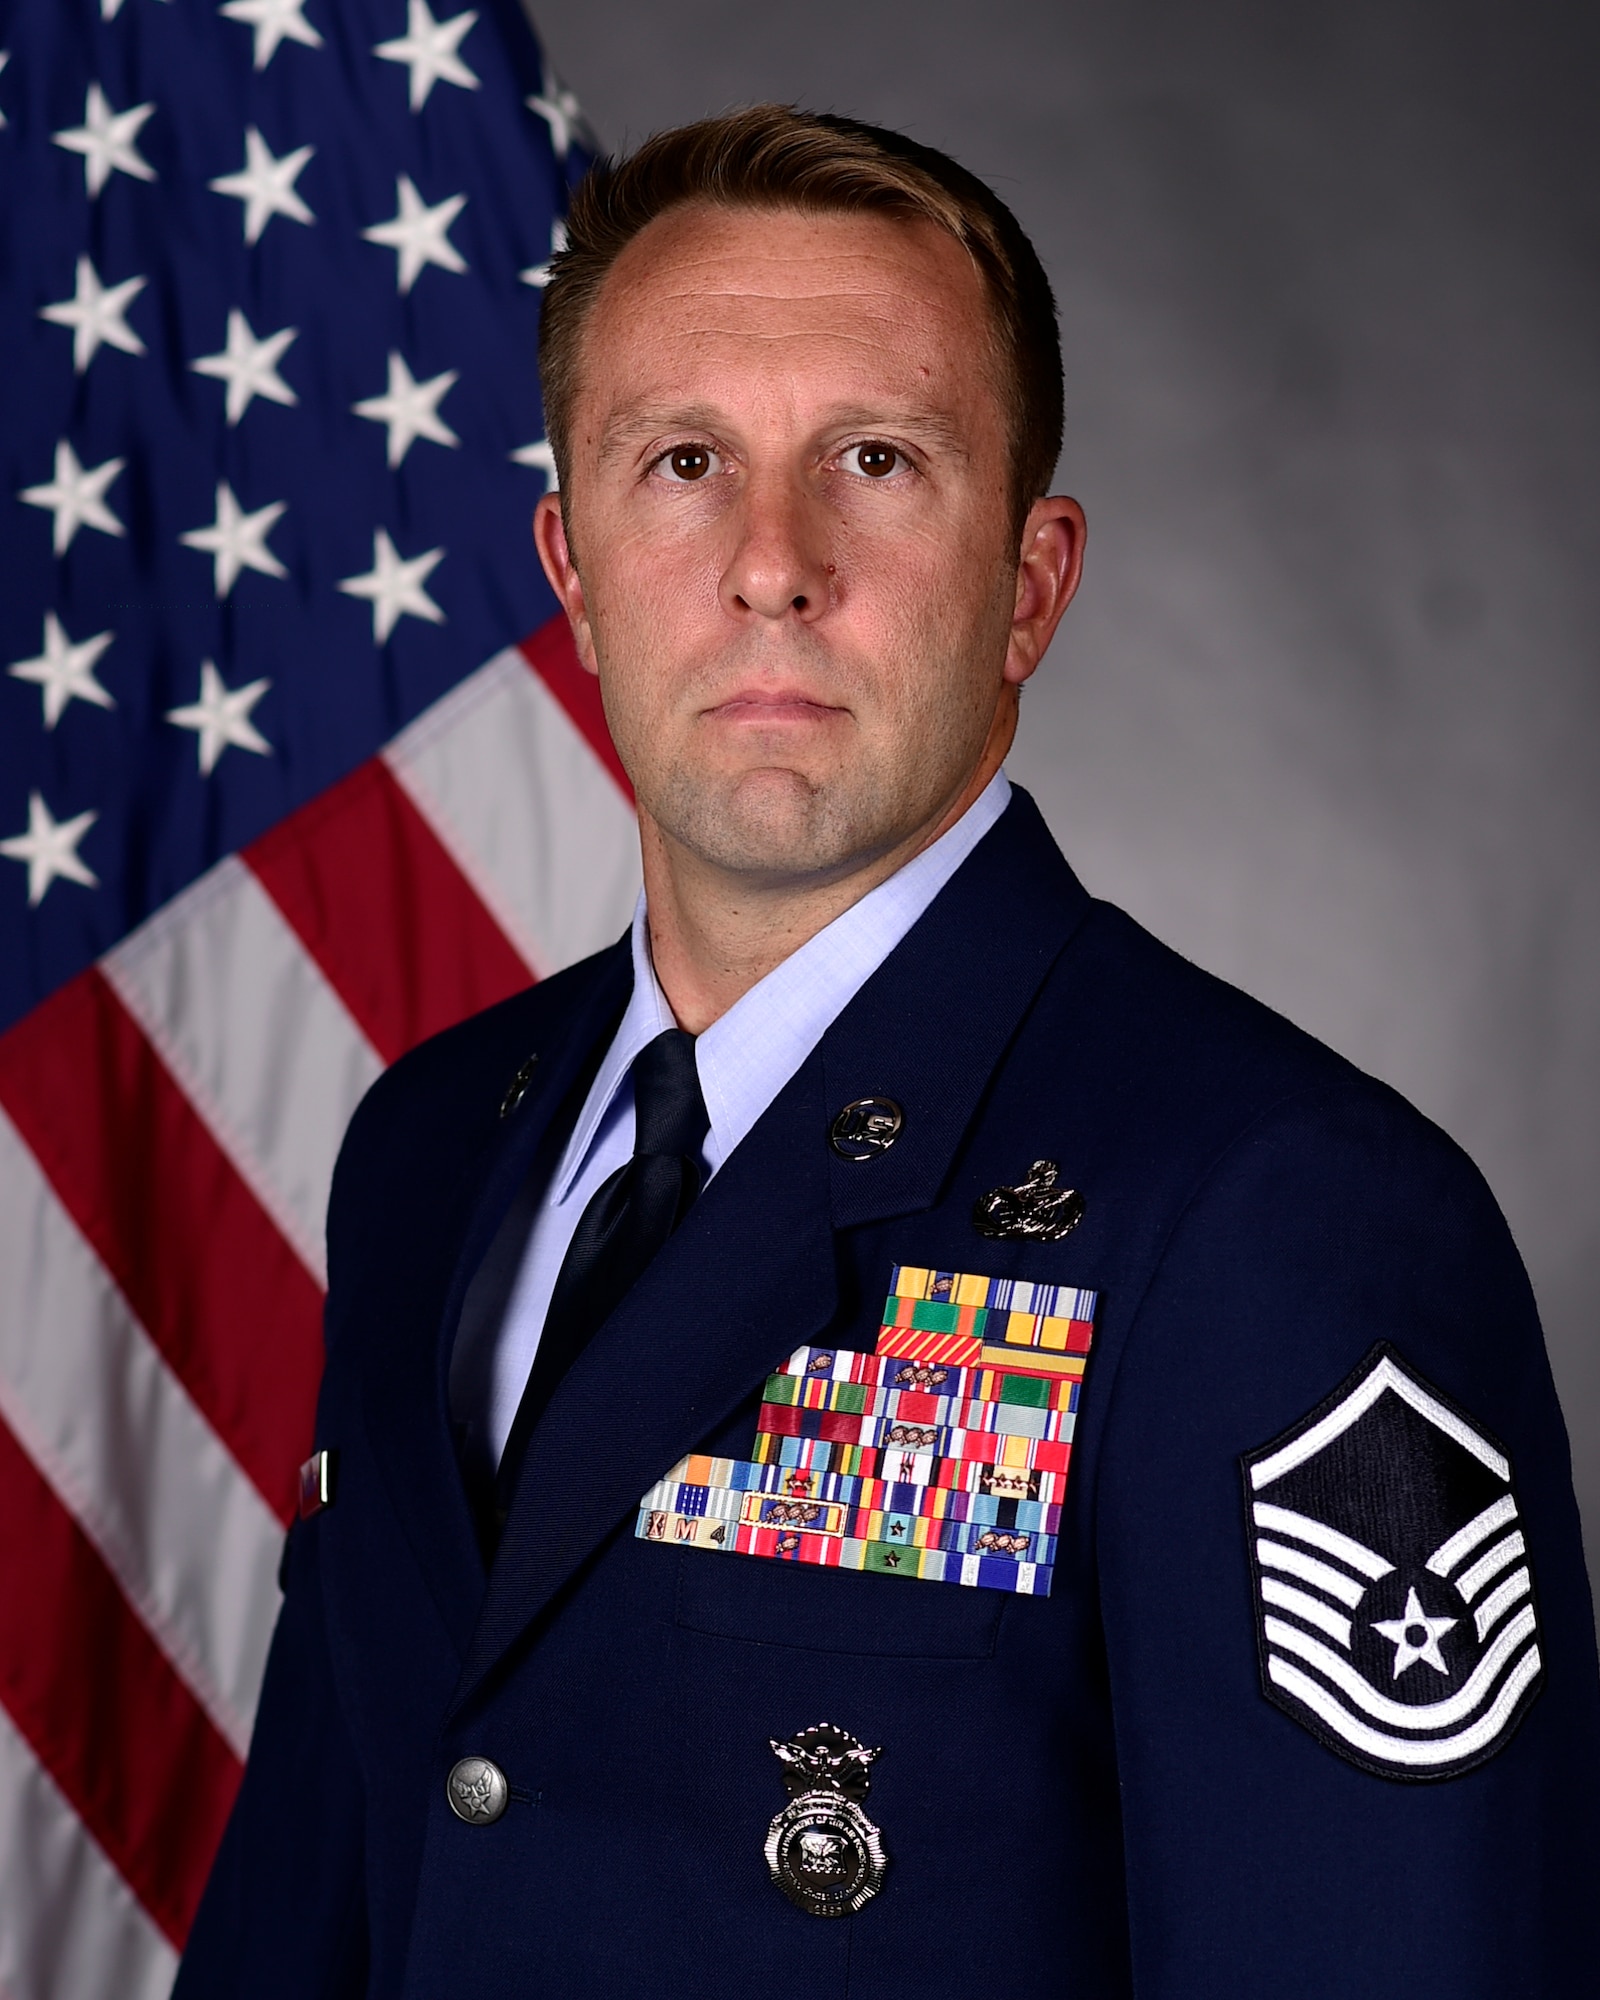 Official photo of the Air Force Reserve Command's 2021 Outstanding Senior NCO of the Year, Master Sgt. Jason W. Cangemi.